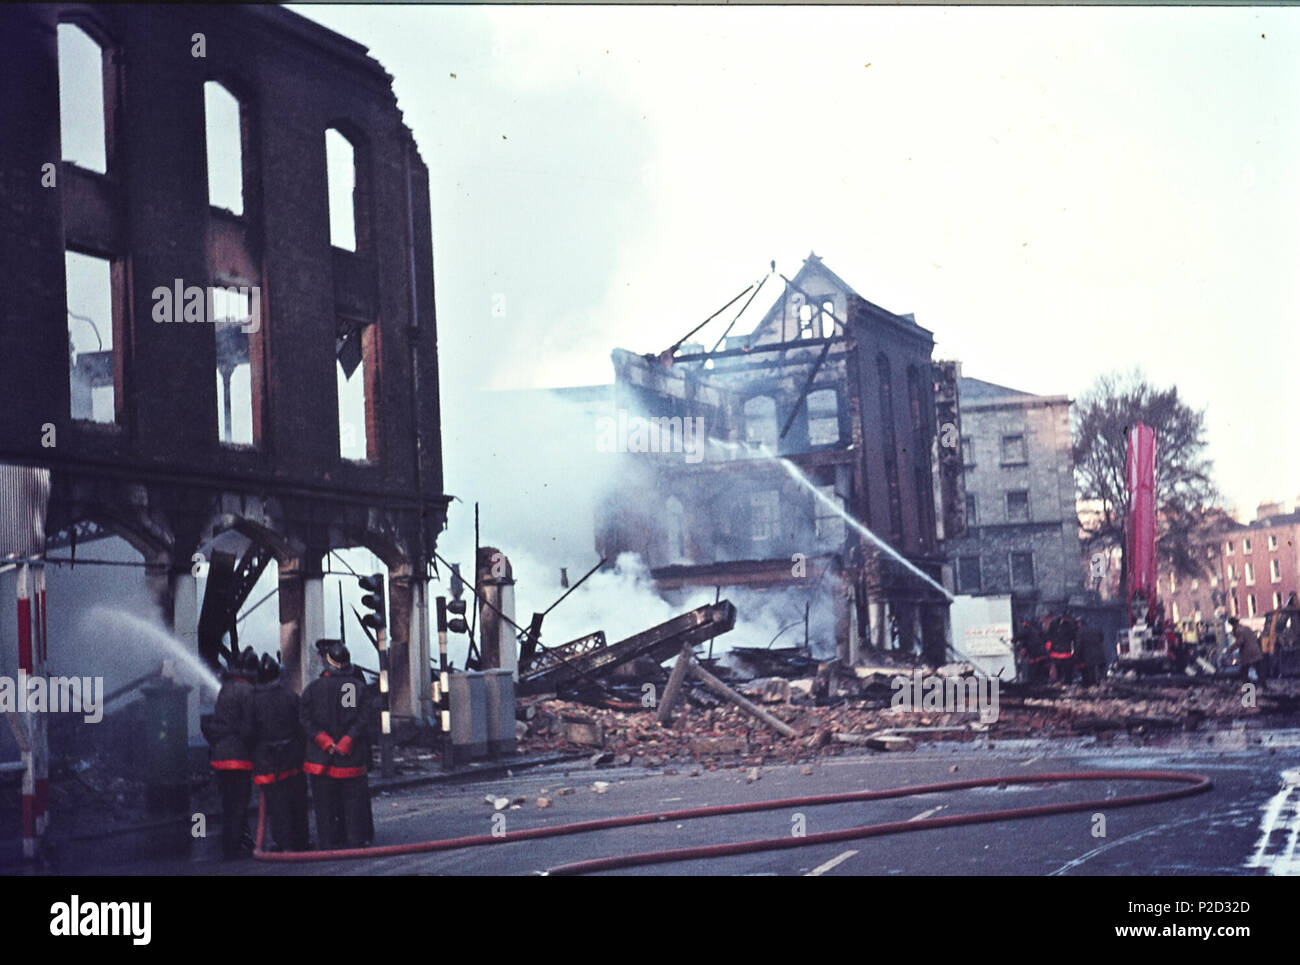 . The aftermath of a huge fire at Thomas McKenzie & Sons Ltd. on Pearse Street, Dublin, luckily situated just opposite Tara Street Fire Station. This report is from the front page of the Irish Times on the following day, Friday 10 April 1970: 'A serious congestion of traffic was experienced throughout the day in central Dublin yesterday following the fire which destroyed the entire three-storied hardware store of Thomas McKenzie and Sons, Ltd., at Pearse street shortly after 5 a.m. ... The blaze was the worst experienced by crews of Dublin Fire Brigade in five years, according to the city's ch Stock Photo